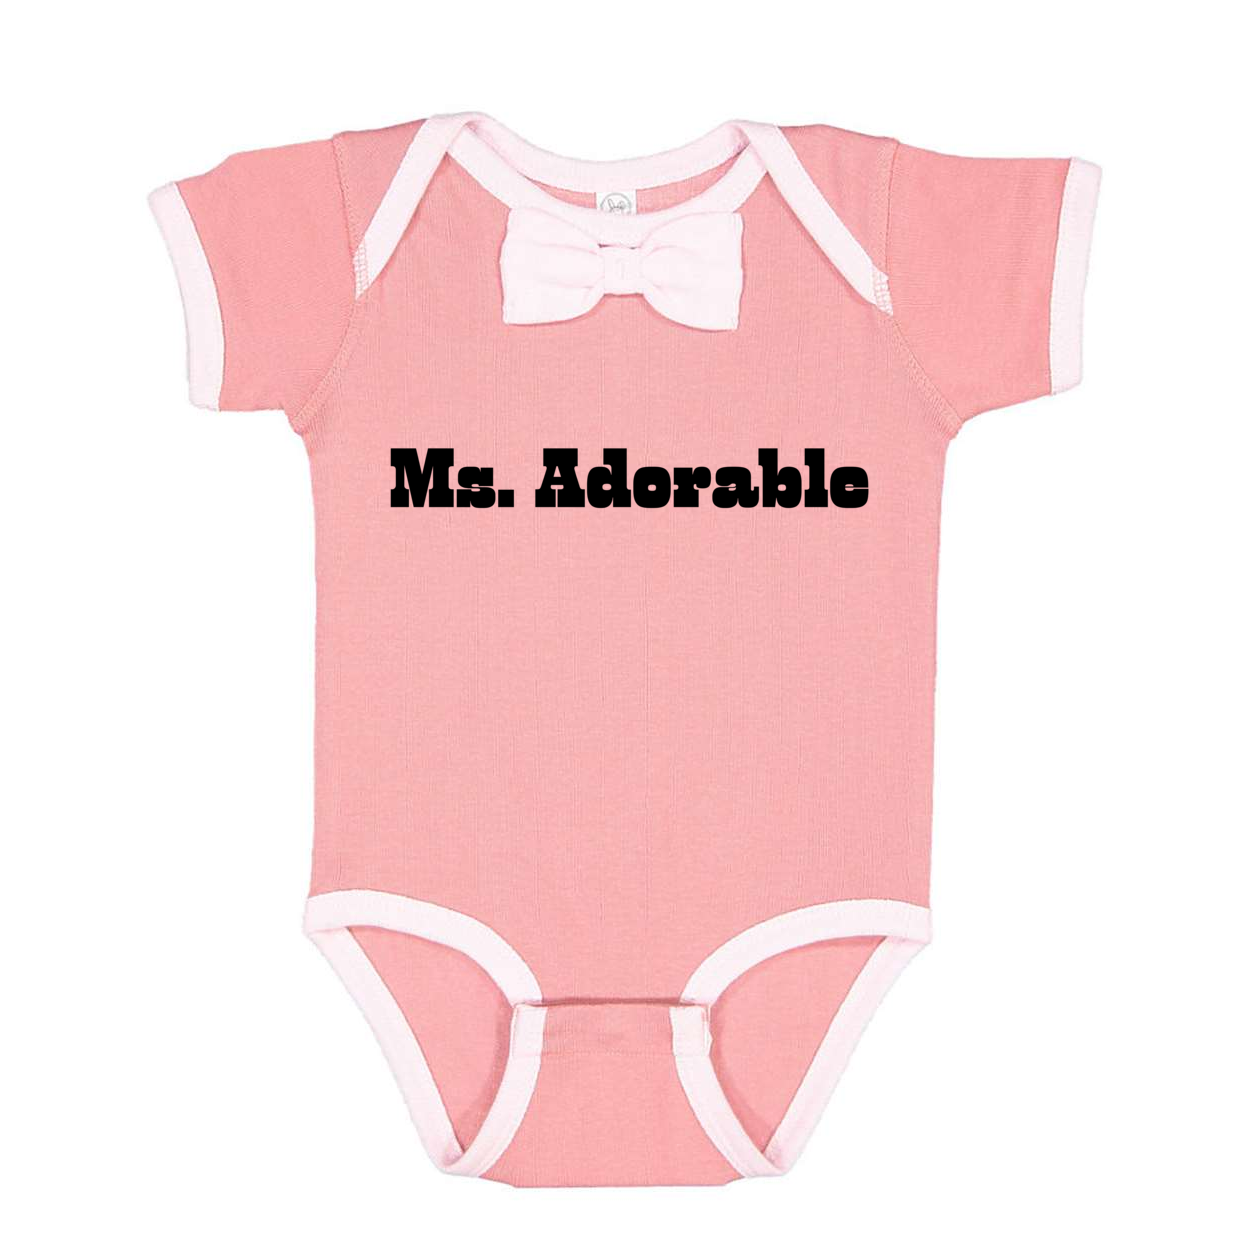 MAUVELOUS BALLERINA - Ms. Adorable Baby Rib Bow Tie Bodysuit - Ships from The US - infant onesie at TFC&H Co.